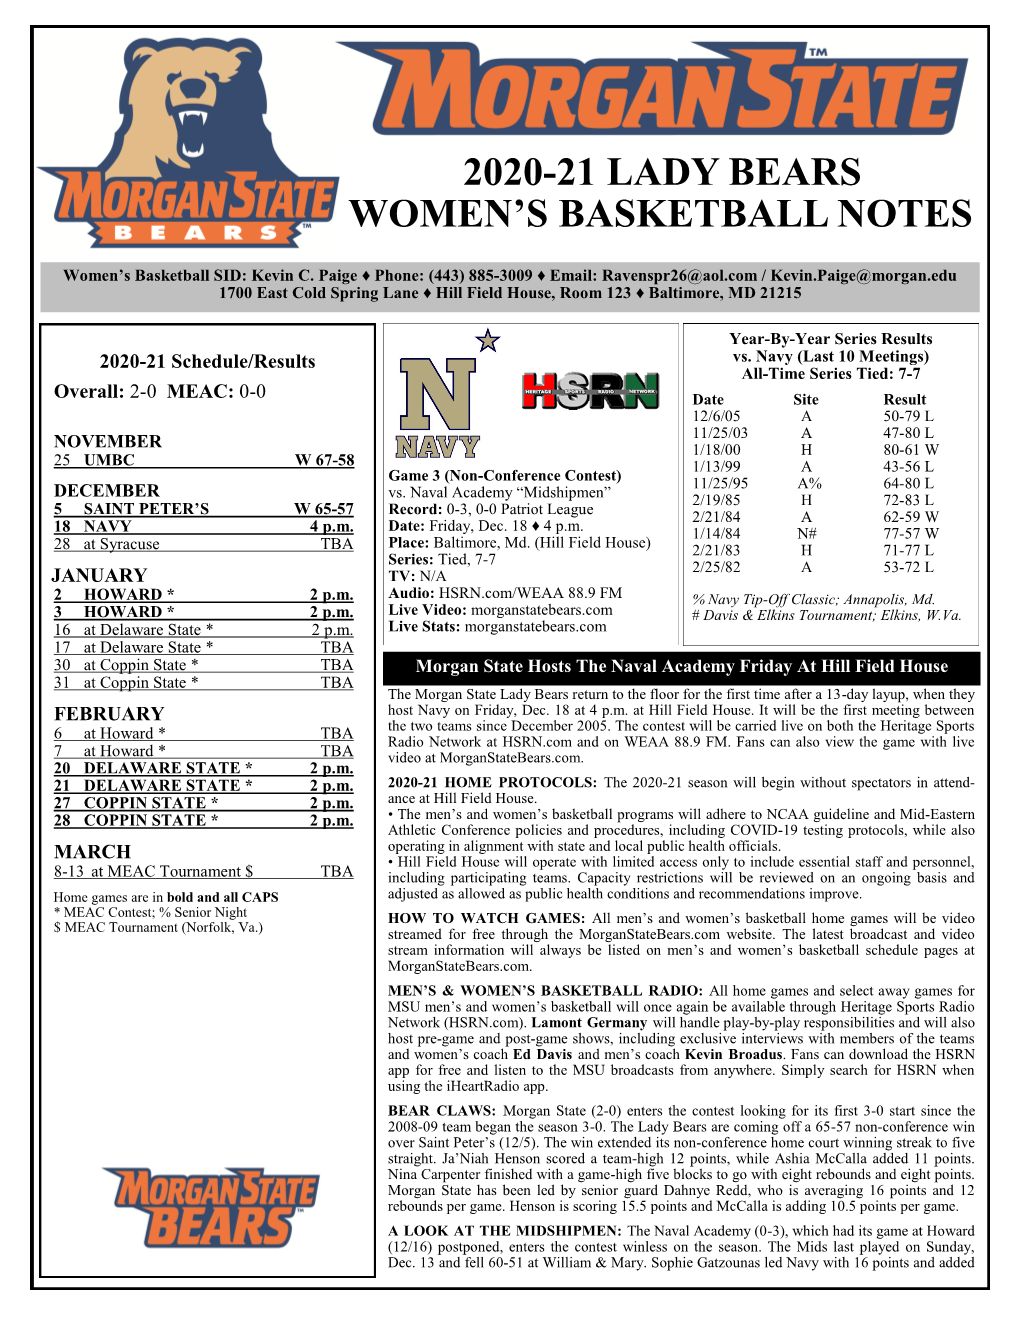 2020-21 Lady Bears Women's Basketball Notes